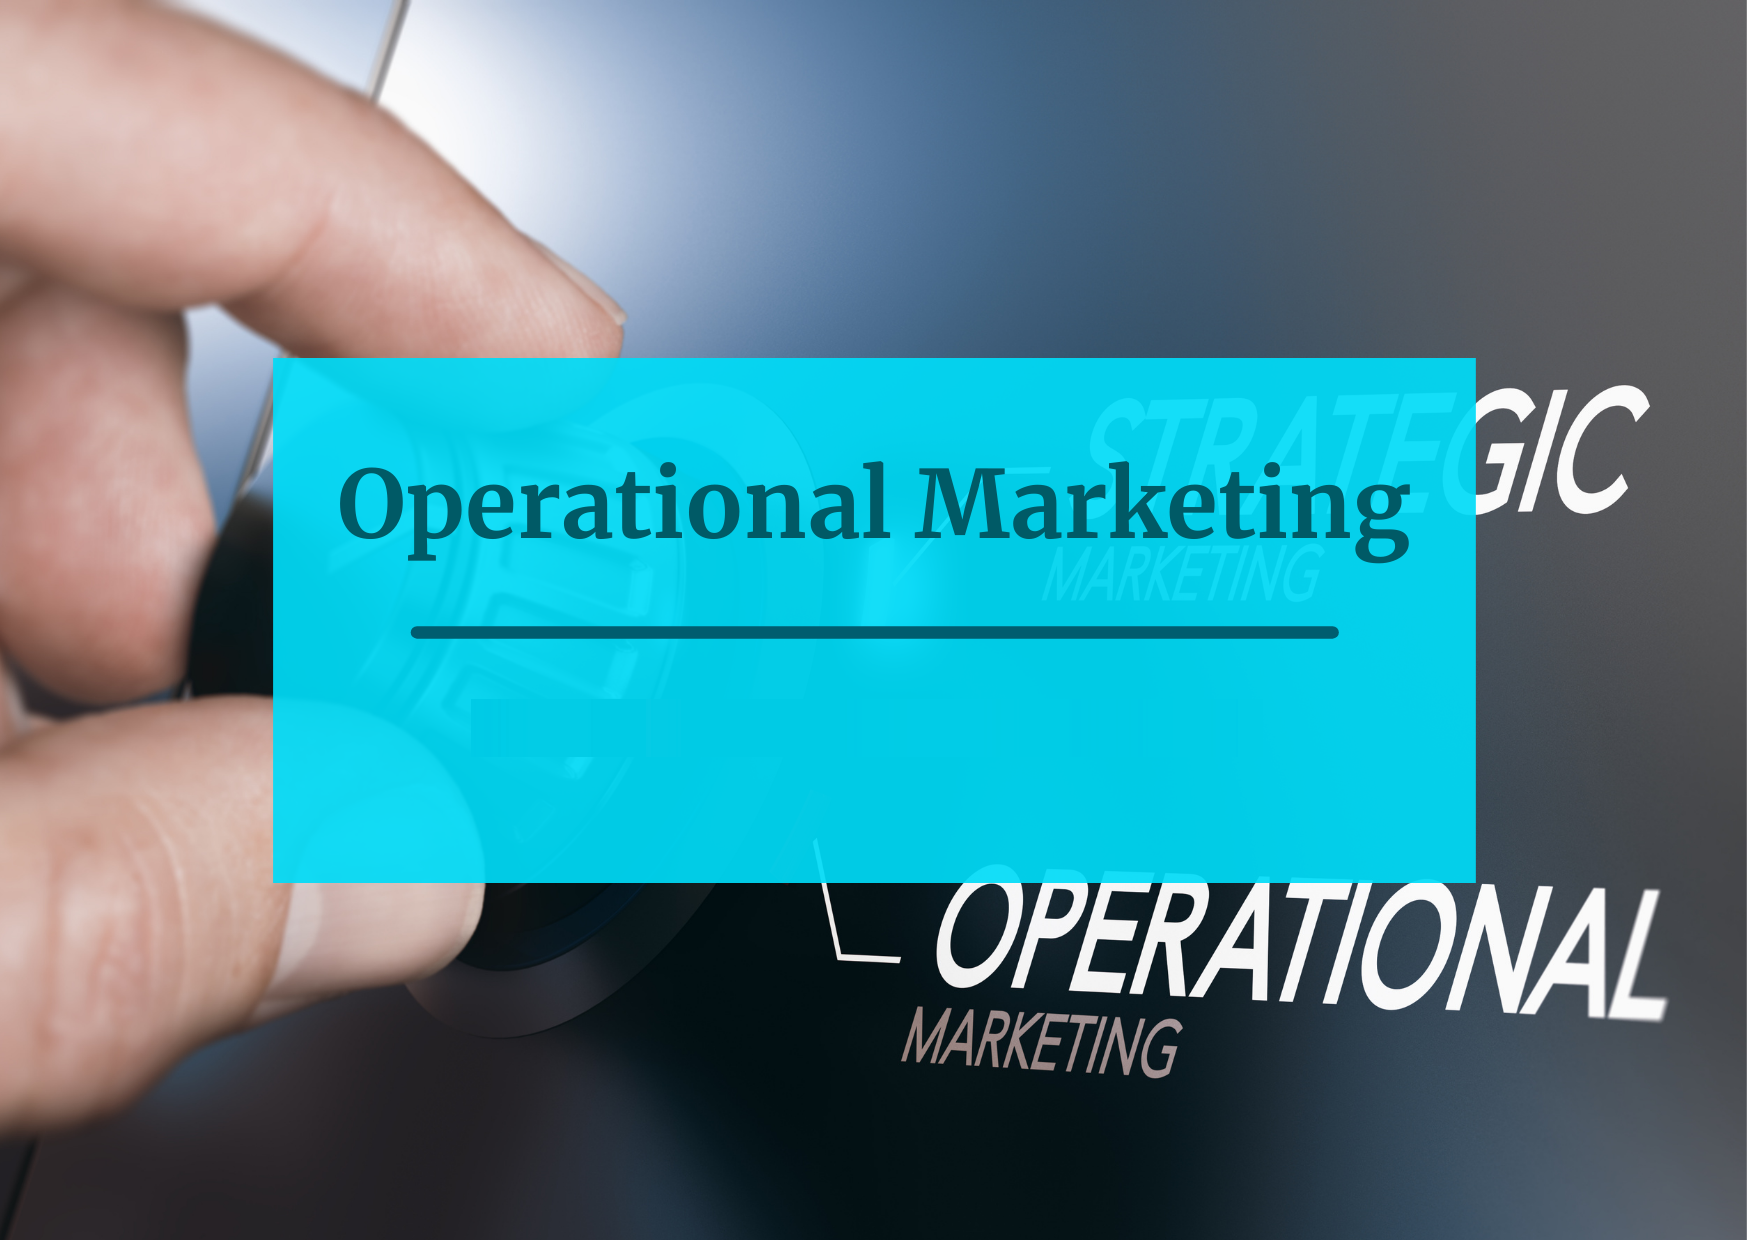 The meaning of operational marketing